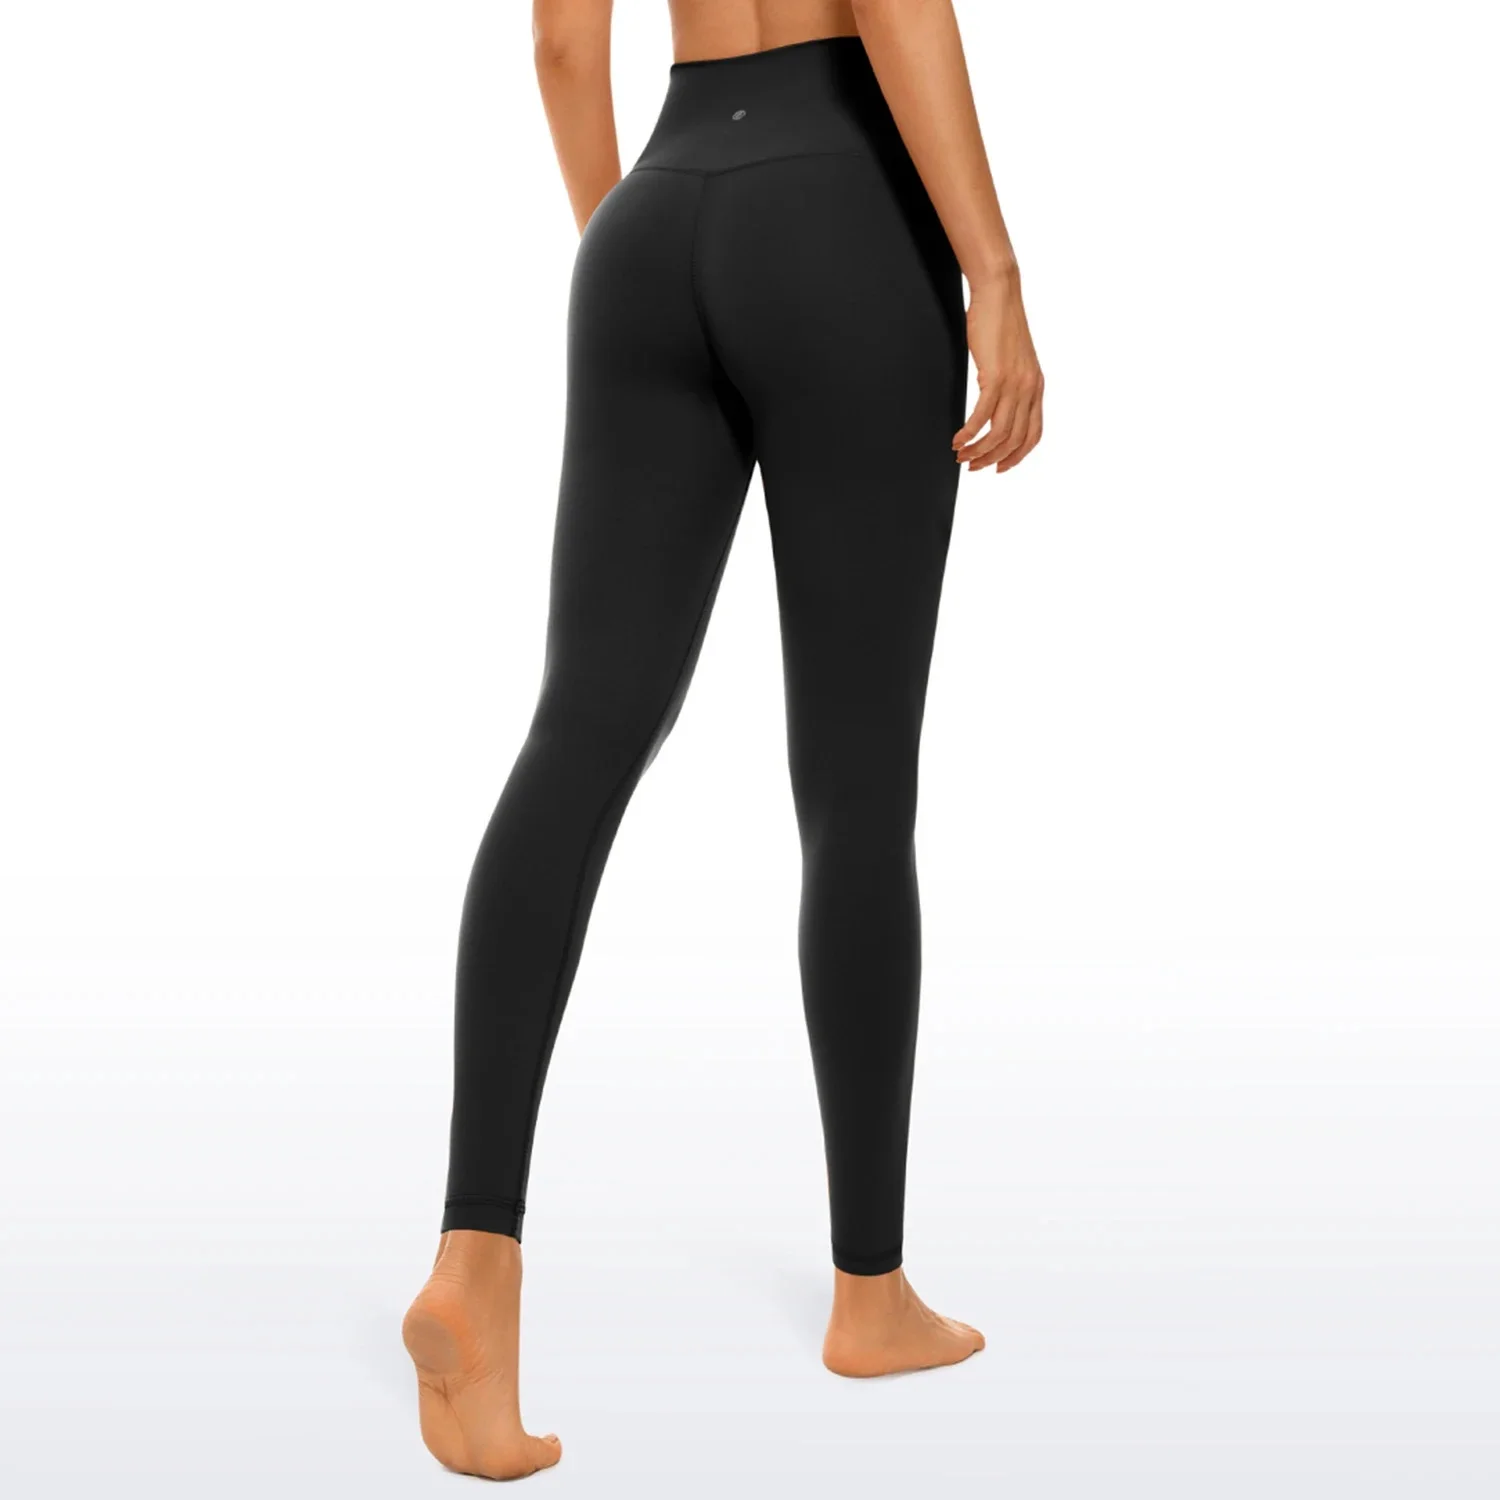 https://ae01.alicdn.com/kf/S119812407f3b40b1865f2b3a7b3cf1bec/CRZ-YOGA-Butterluxe-Extra-Long-Leggings-for-Tall-Women-31-Inches-High-Waisted-Athletic-Workout-Leggings.jpg